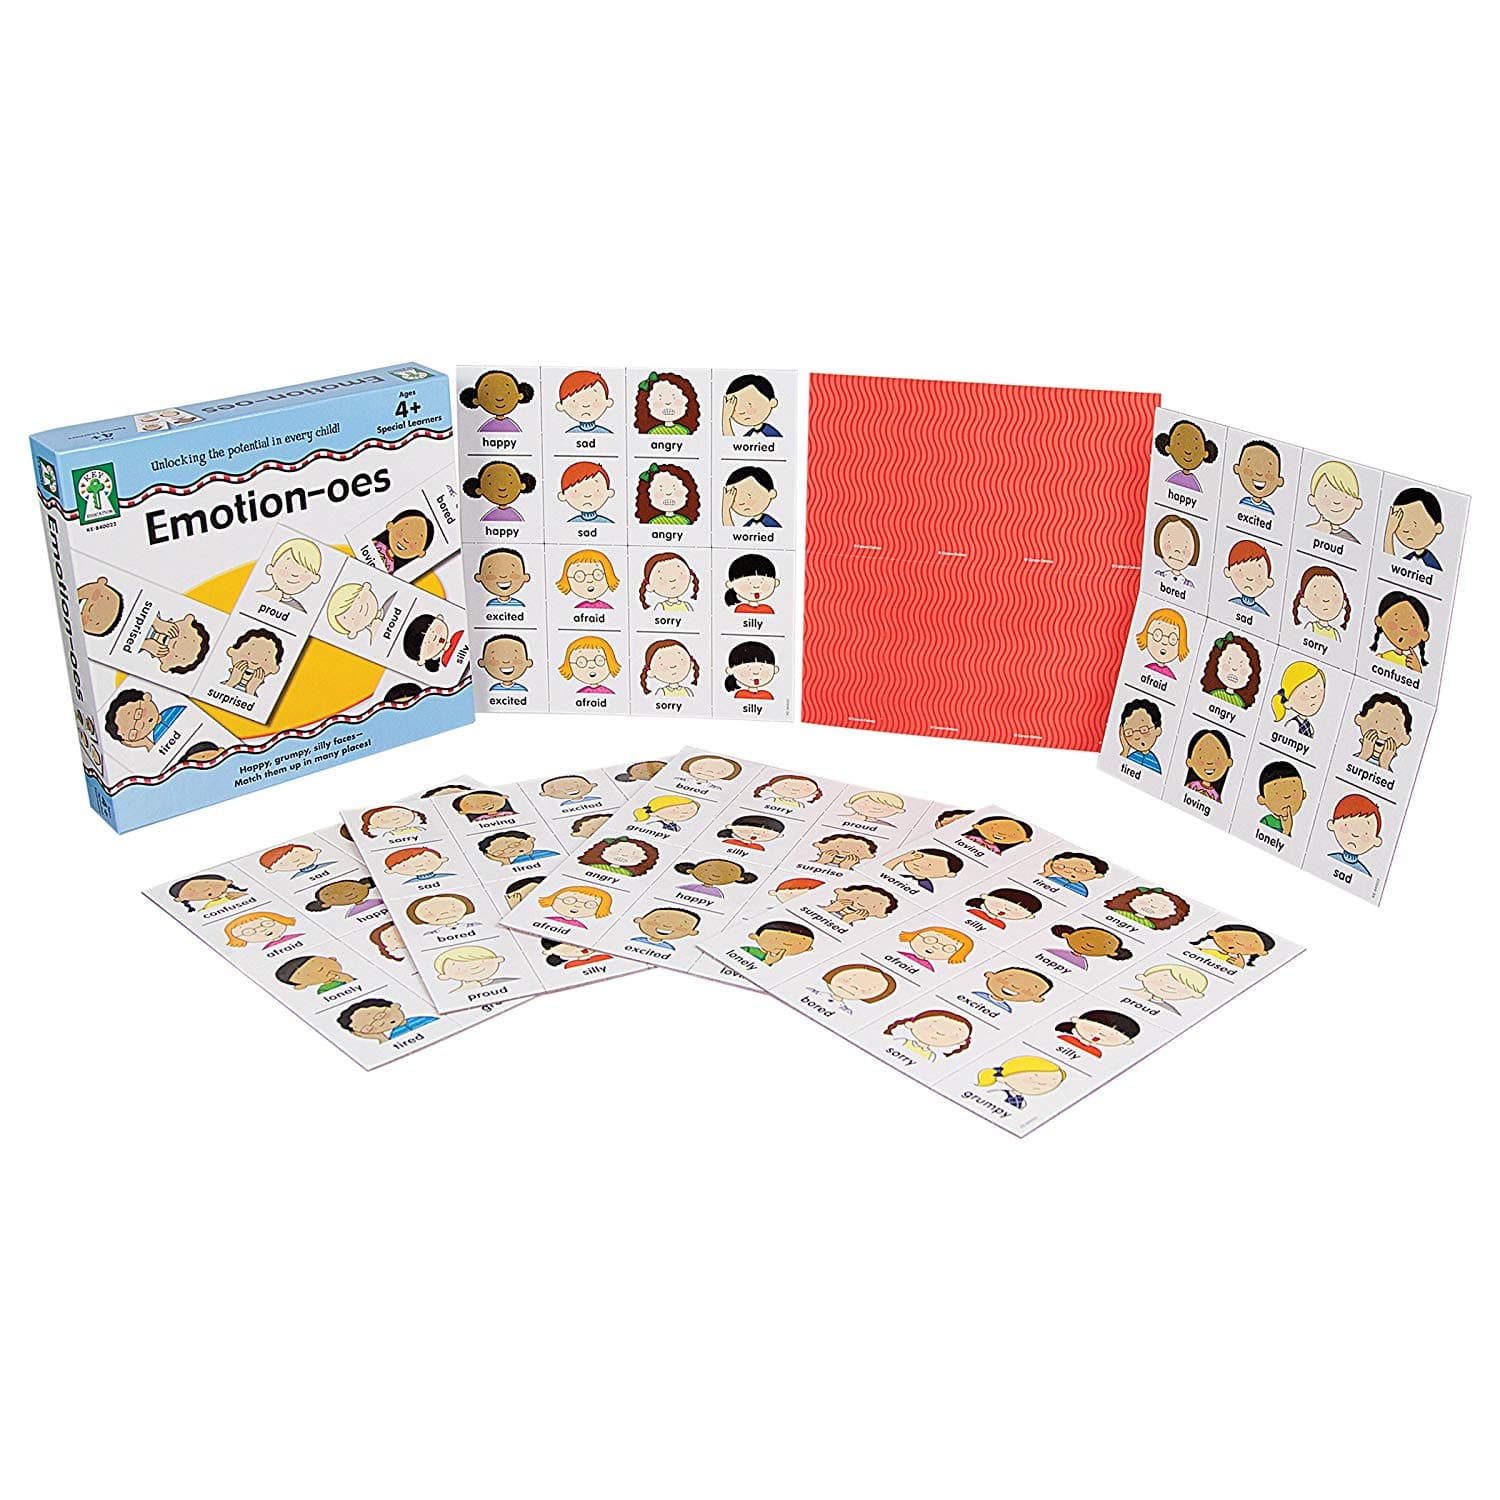 Emotionoes Board Game, Emotionoes: The Game of Emotional Dominoes brings a fresh and educational twist to a classic game. This game is not just about matching shapes or numbers; it’s about recognizing, understanding, and matching emotions. Emotionoes Board Game Features: Emotional Learning: This game provides an engaging way to introduce children to different emotions. They will learn to identify feelings through facial expressions, enriching their emotional intelligence. Easy to Grasp: The pieces are large